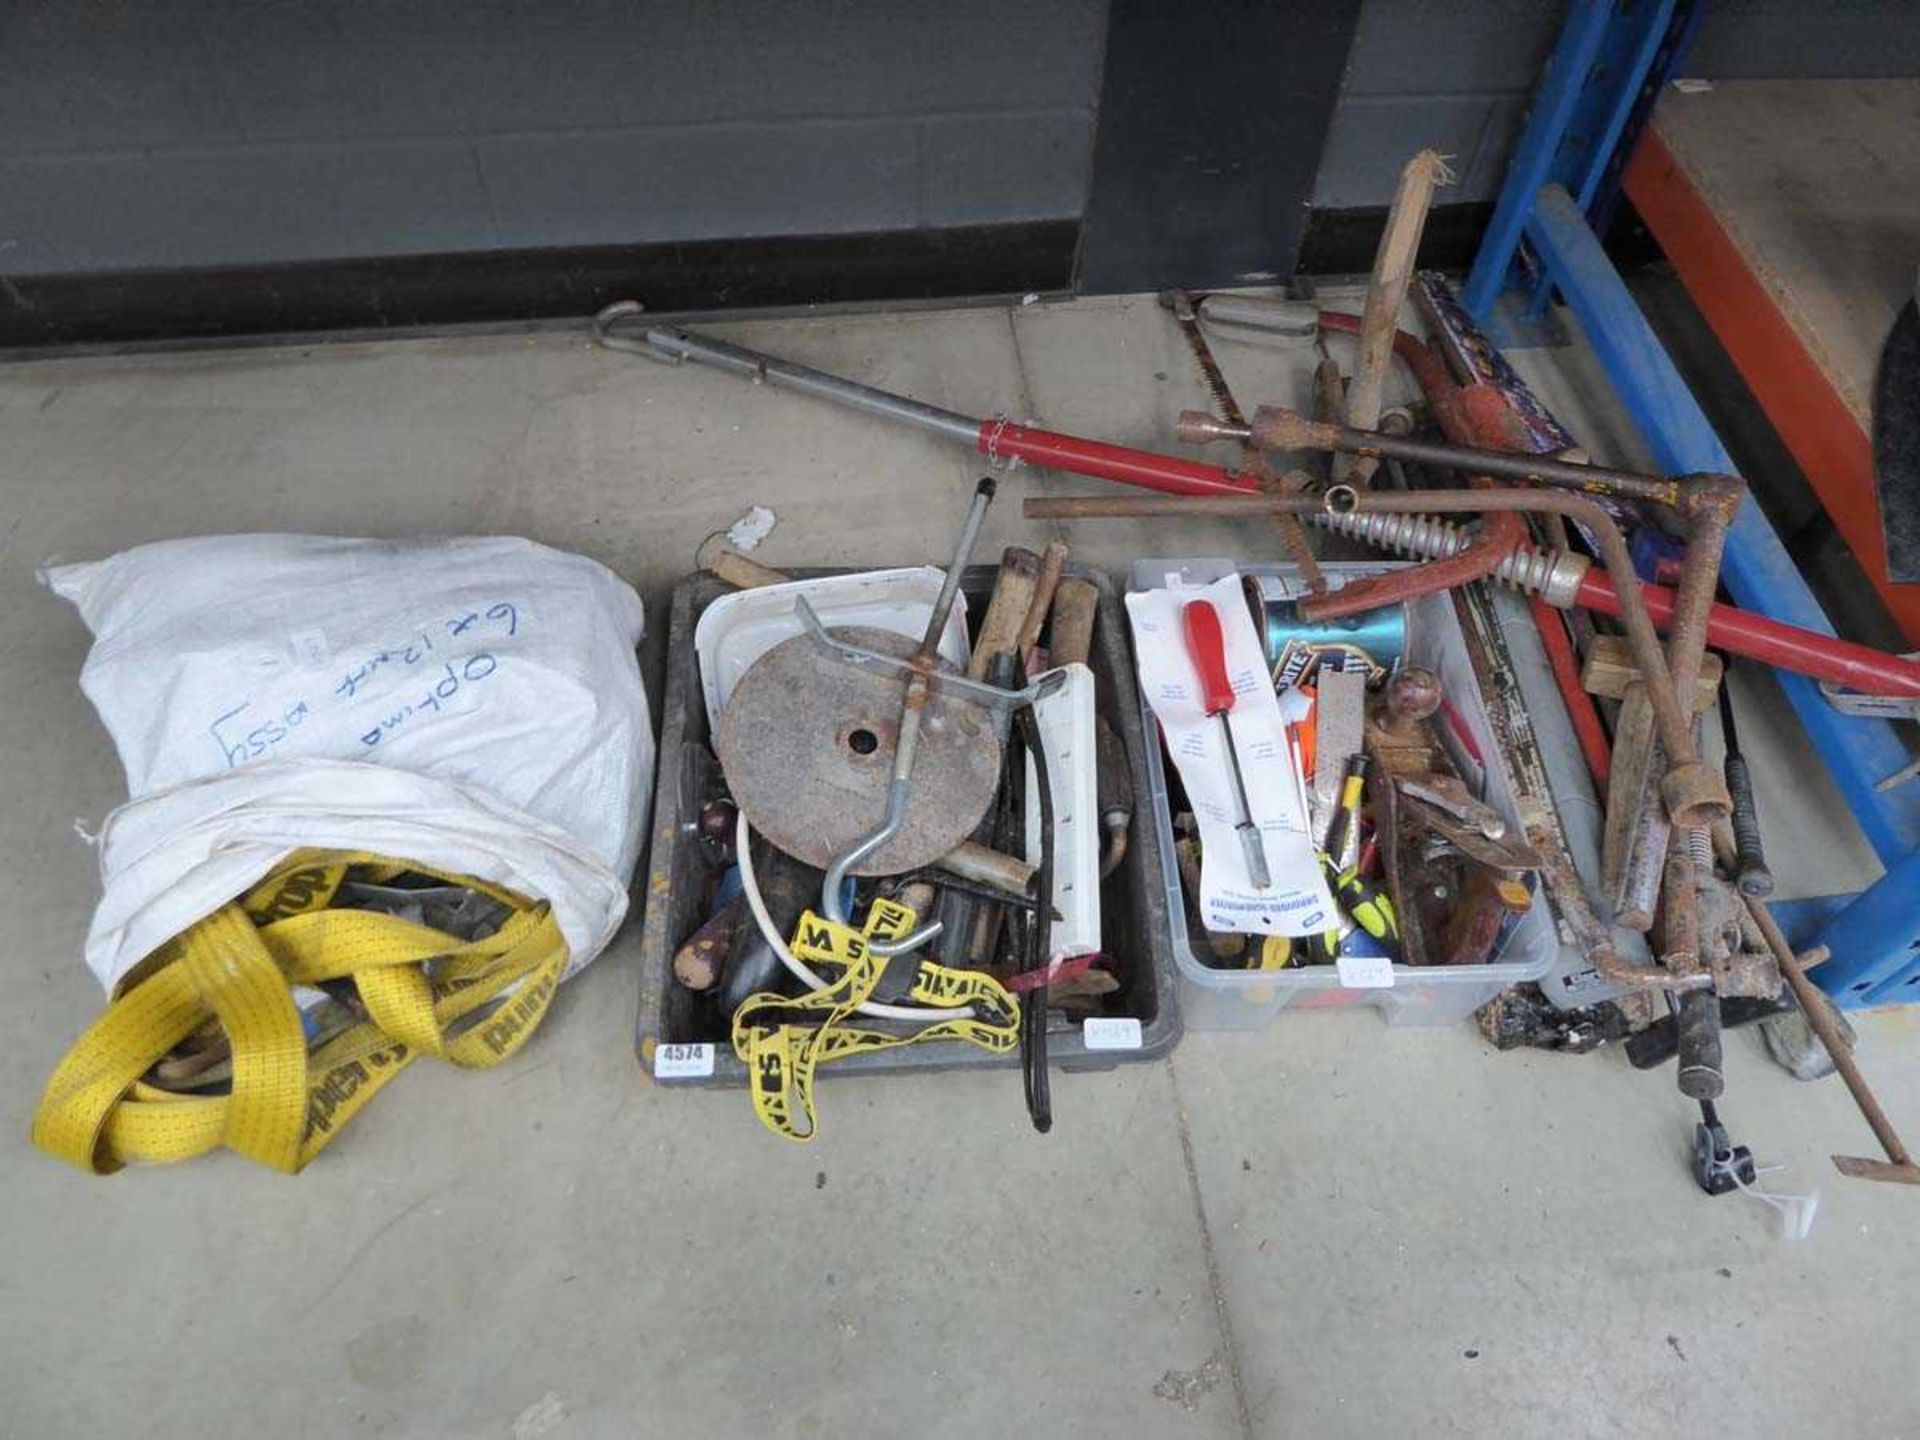 Bag containing lorry straps and various assorted tools